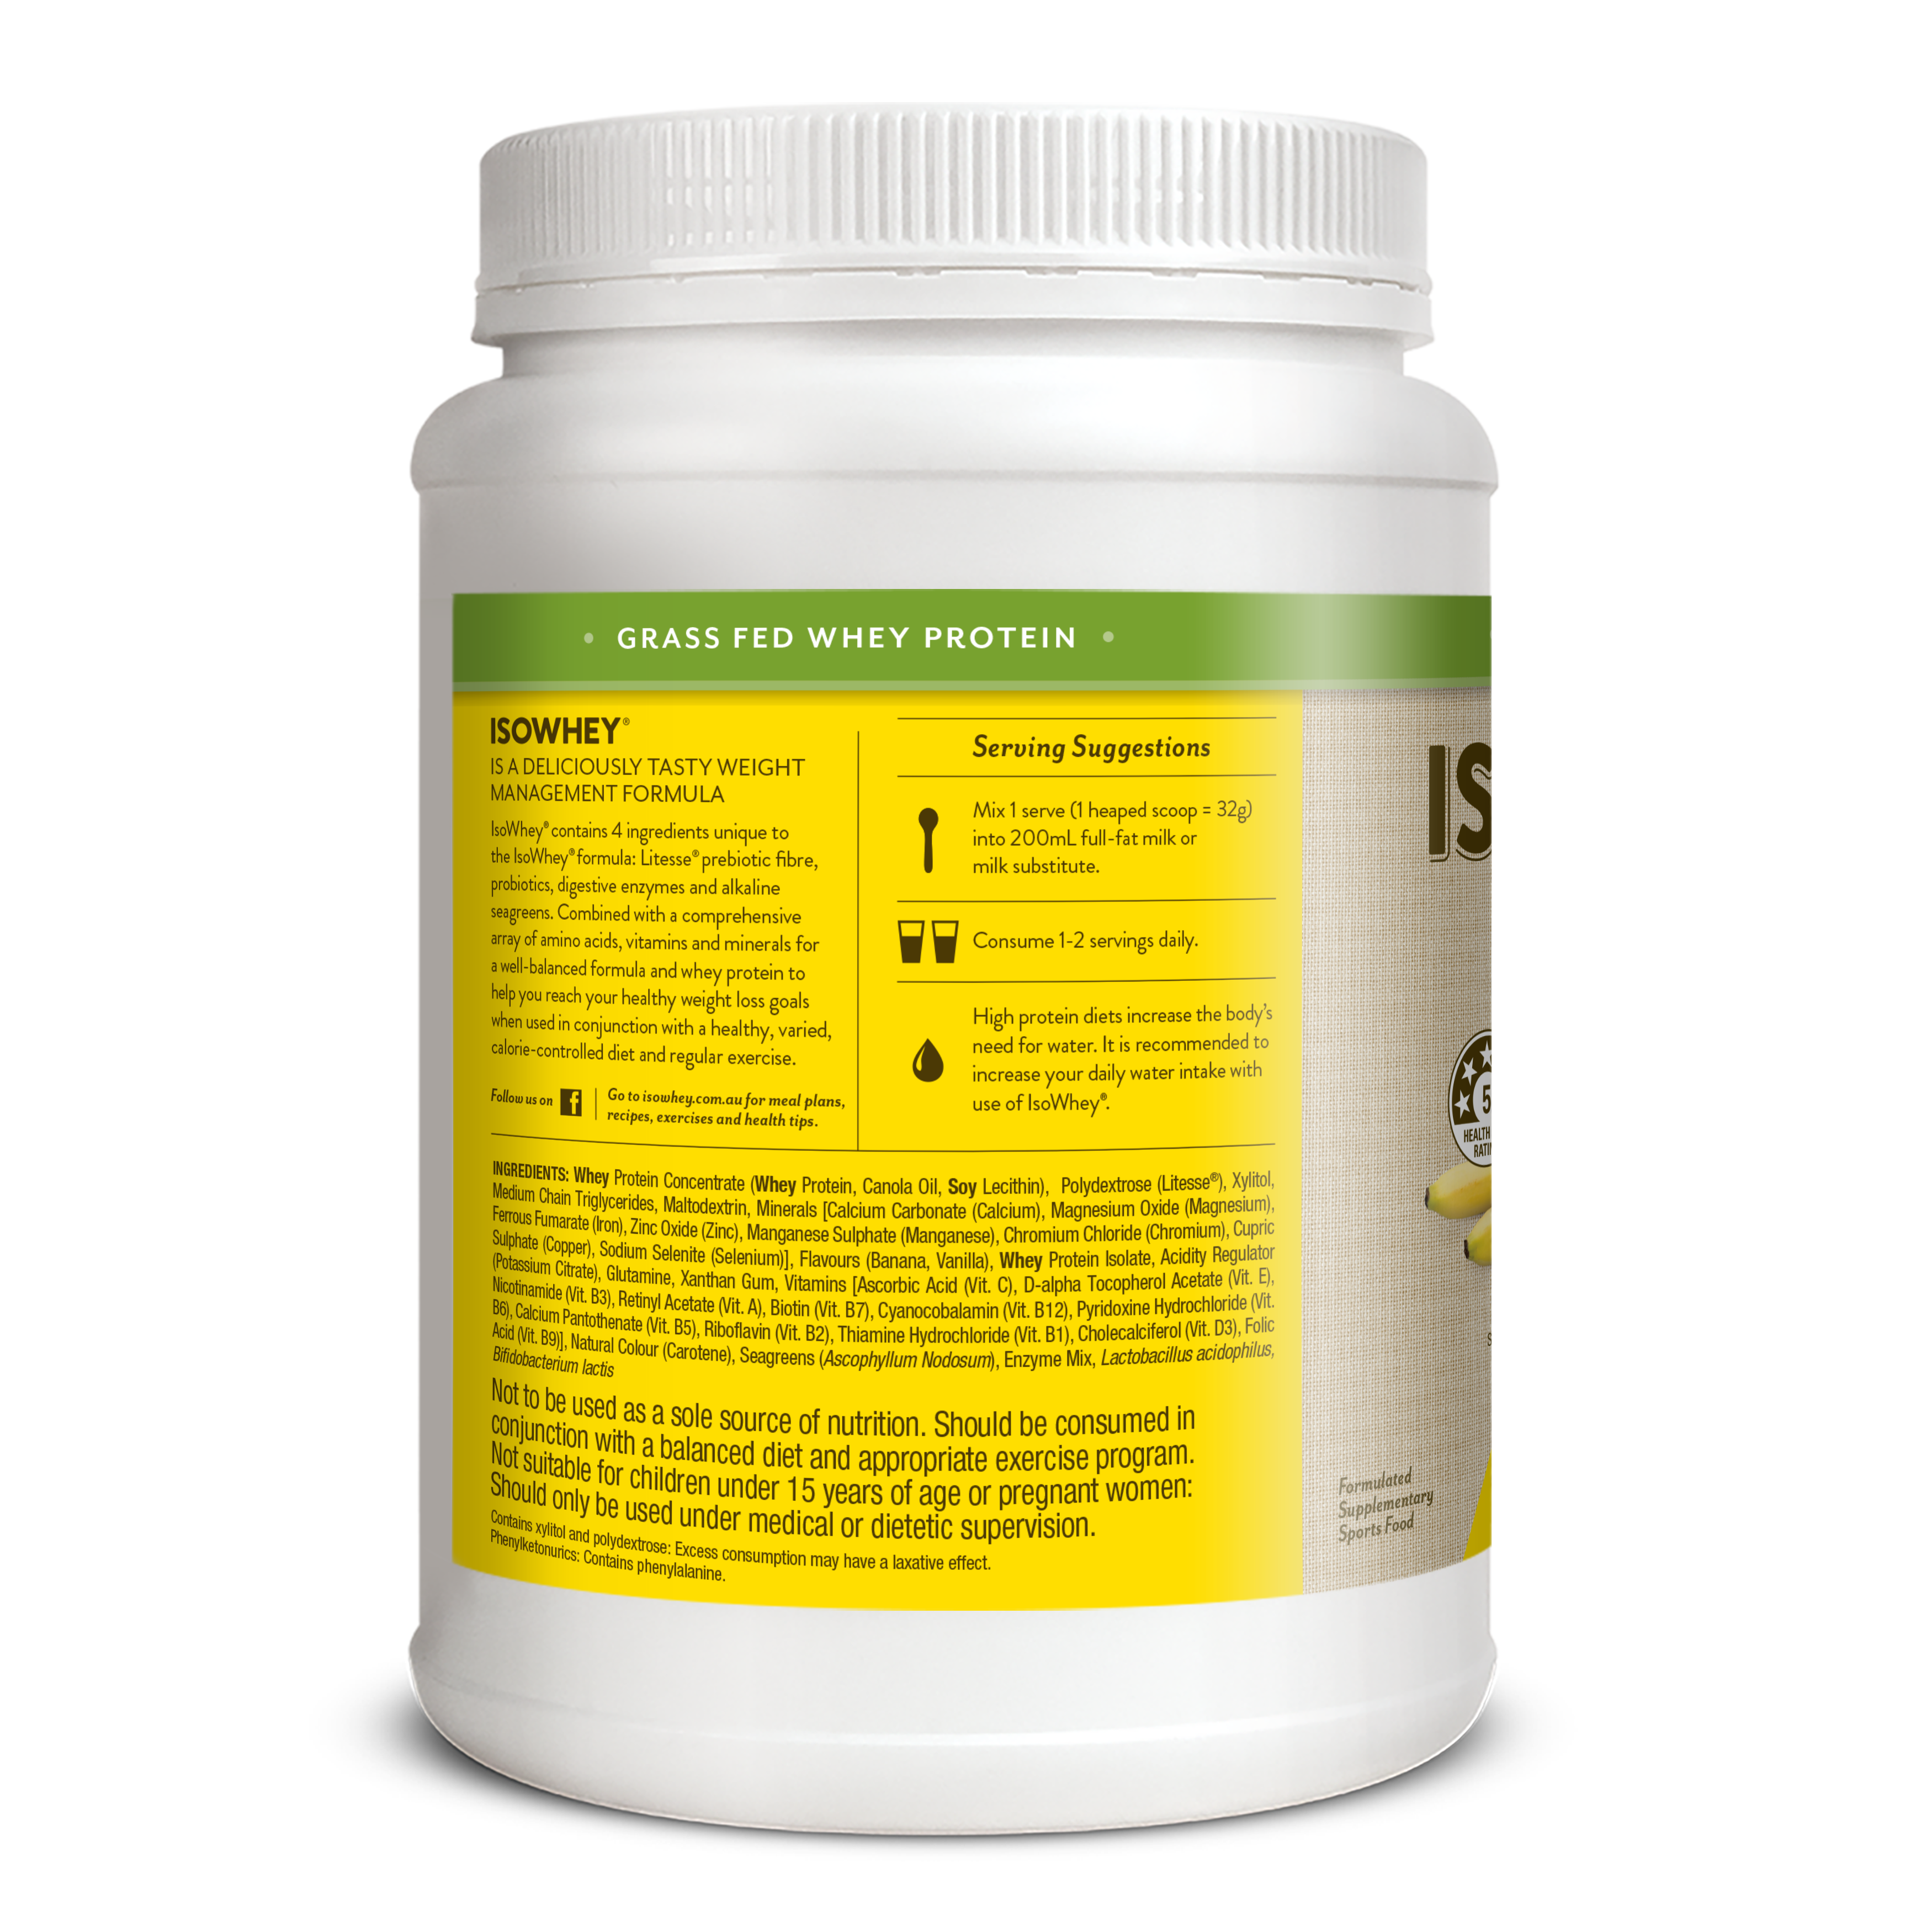 IsoWhey Complete Banana Smoothie 672g